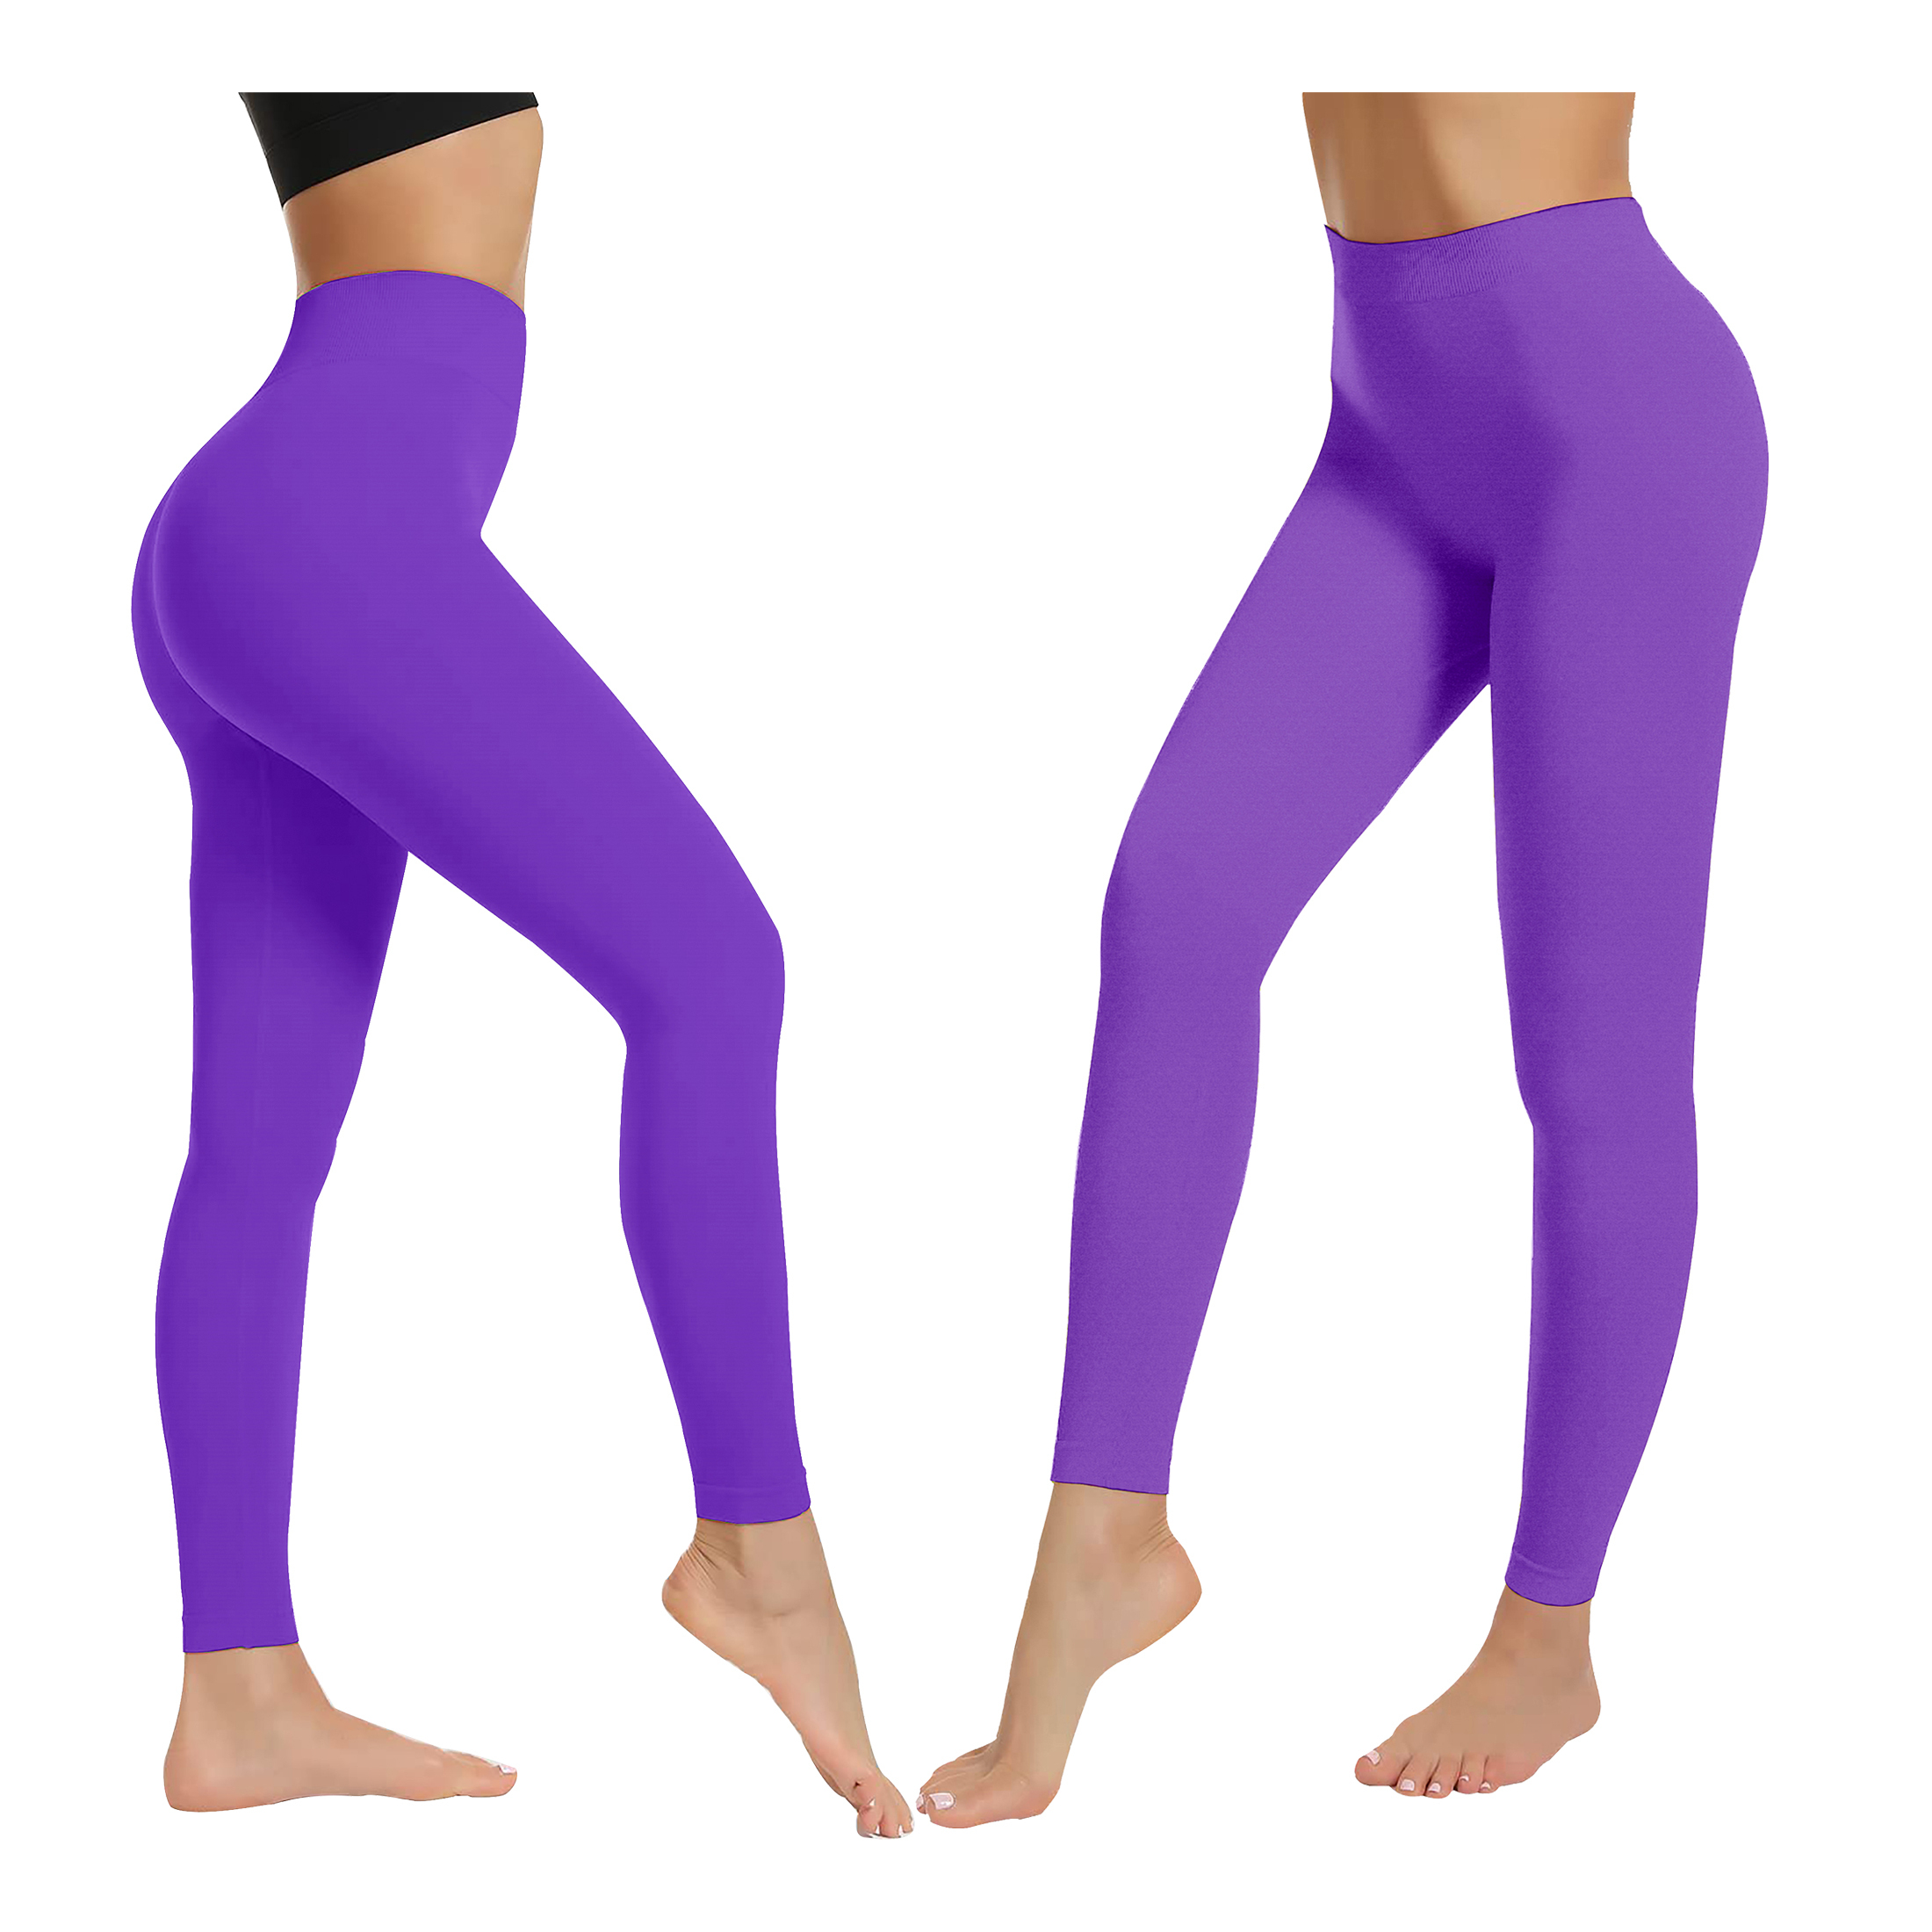 2-Pack: Women's High-Waist Ultra-Soft Stretchy Solid Fitness Yoga Leggings Pants - M